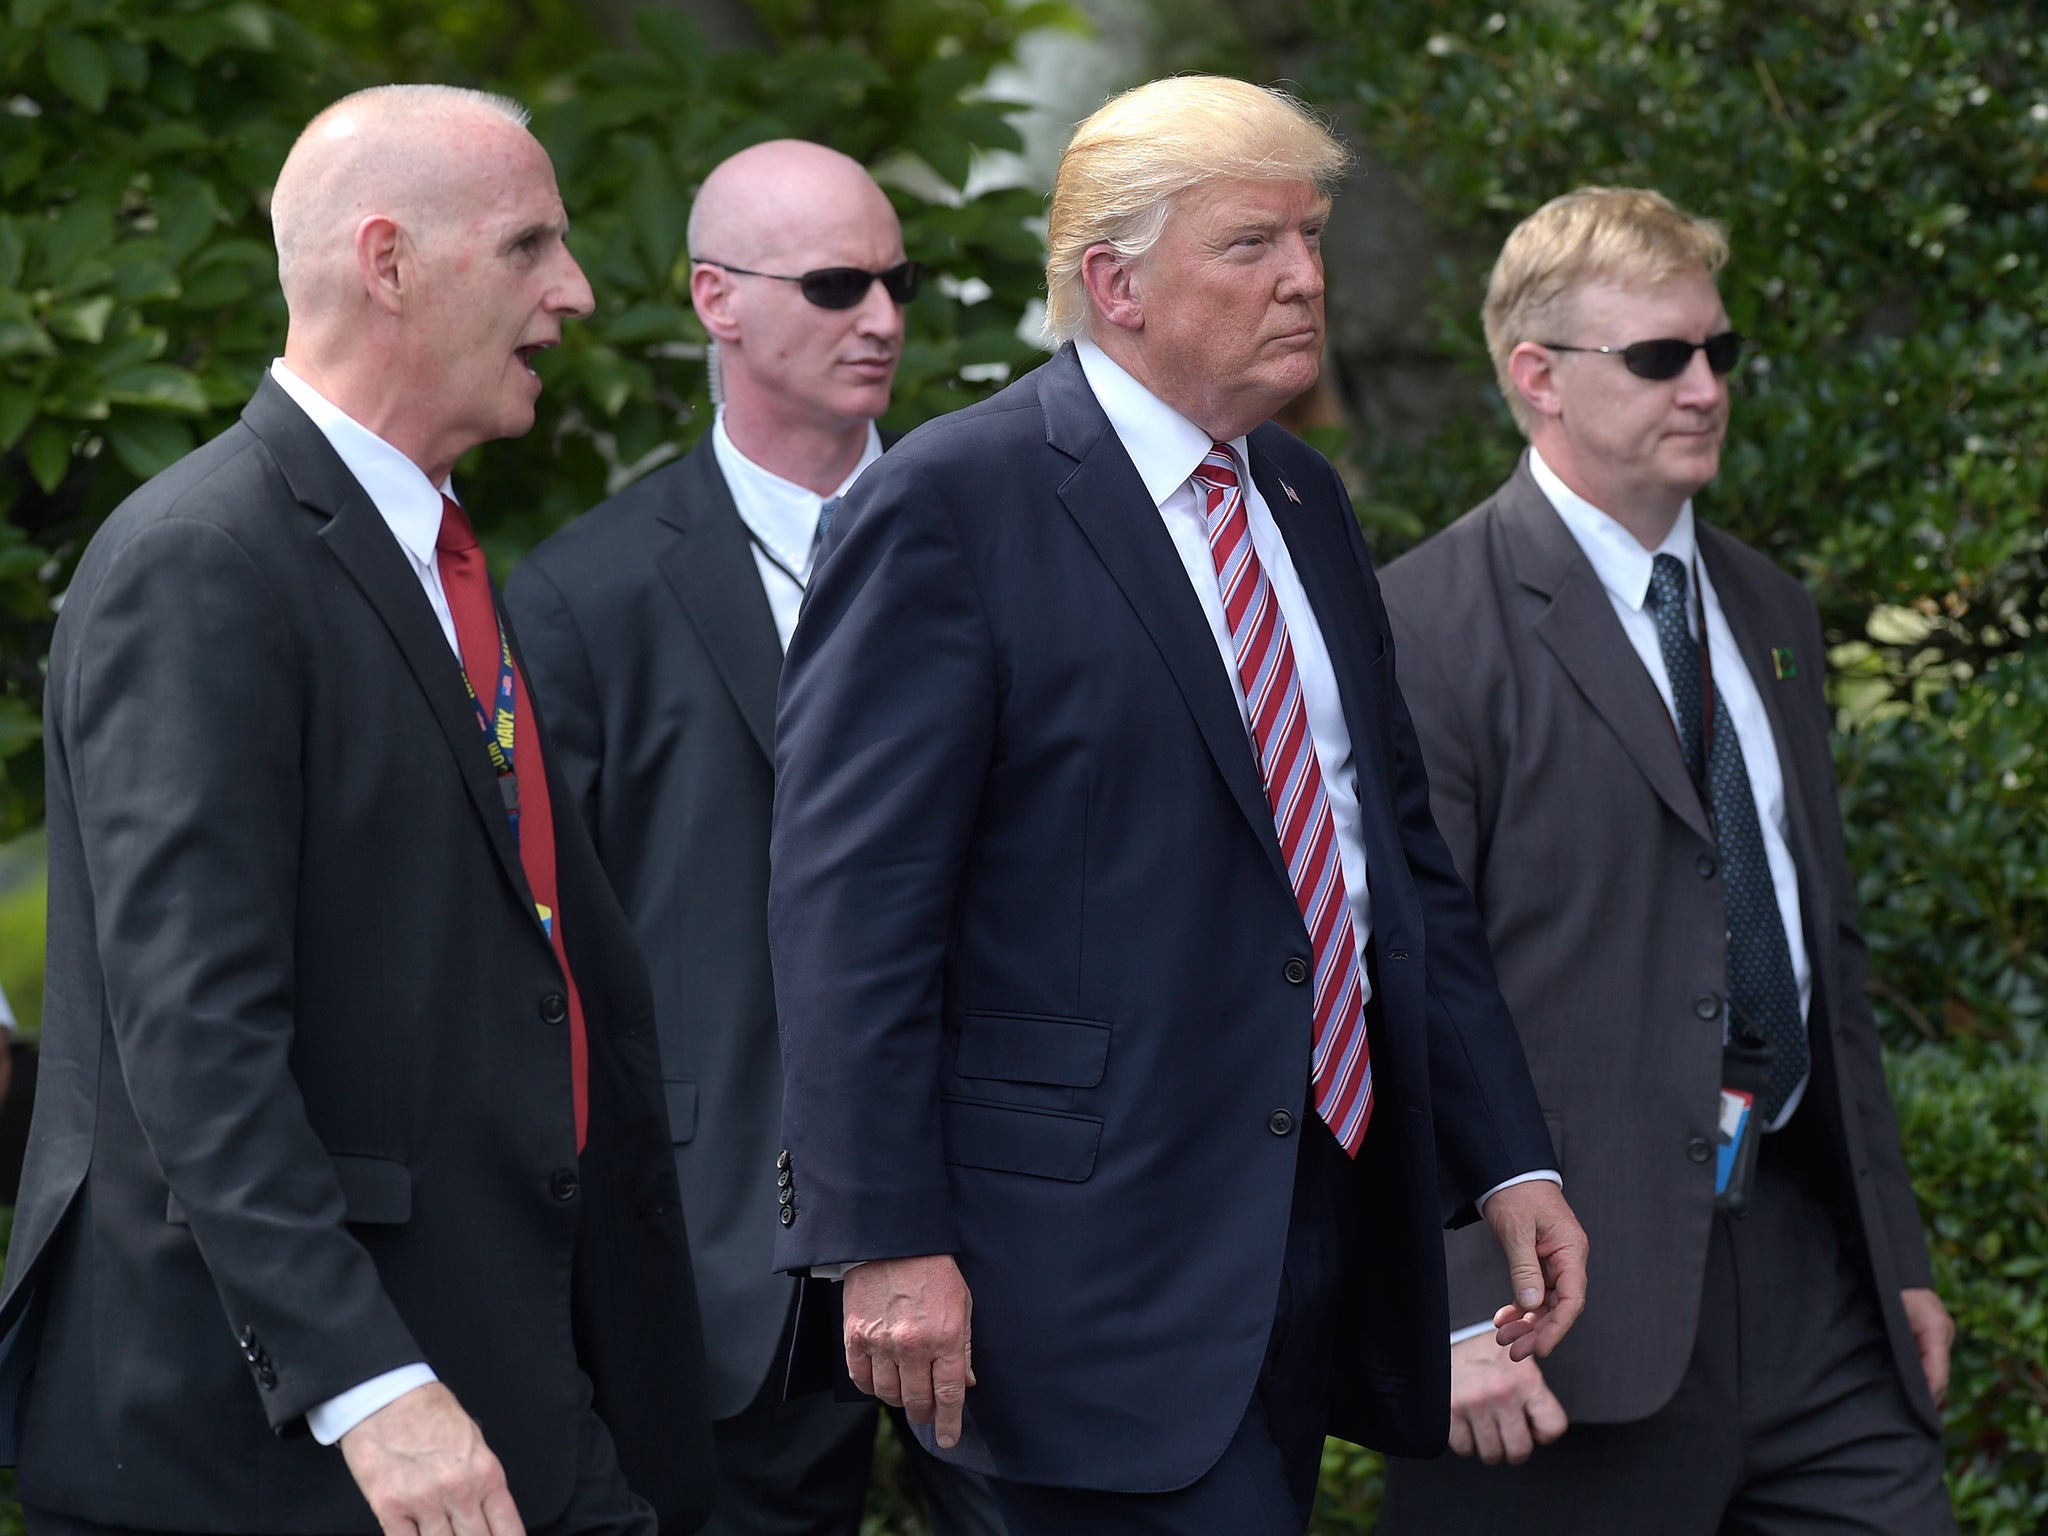 President Donald Trump, his longtime bodyguard Keith Schiller, left, and two Secret Service agents walk along the South Lawn of the White House